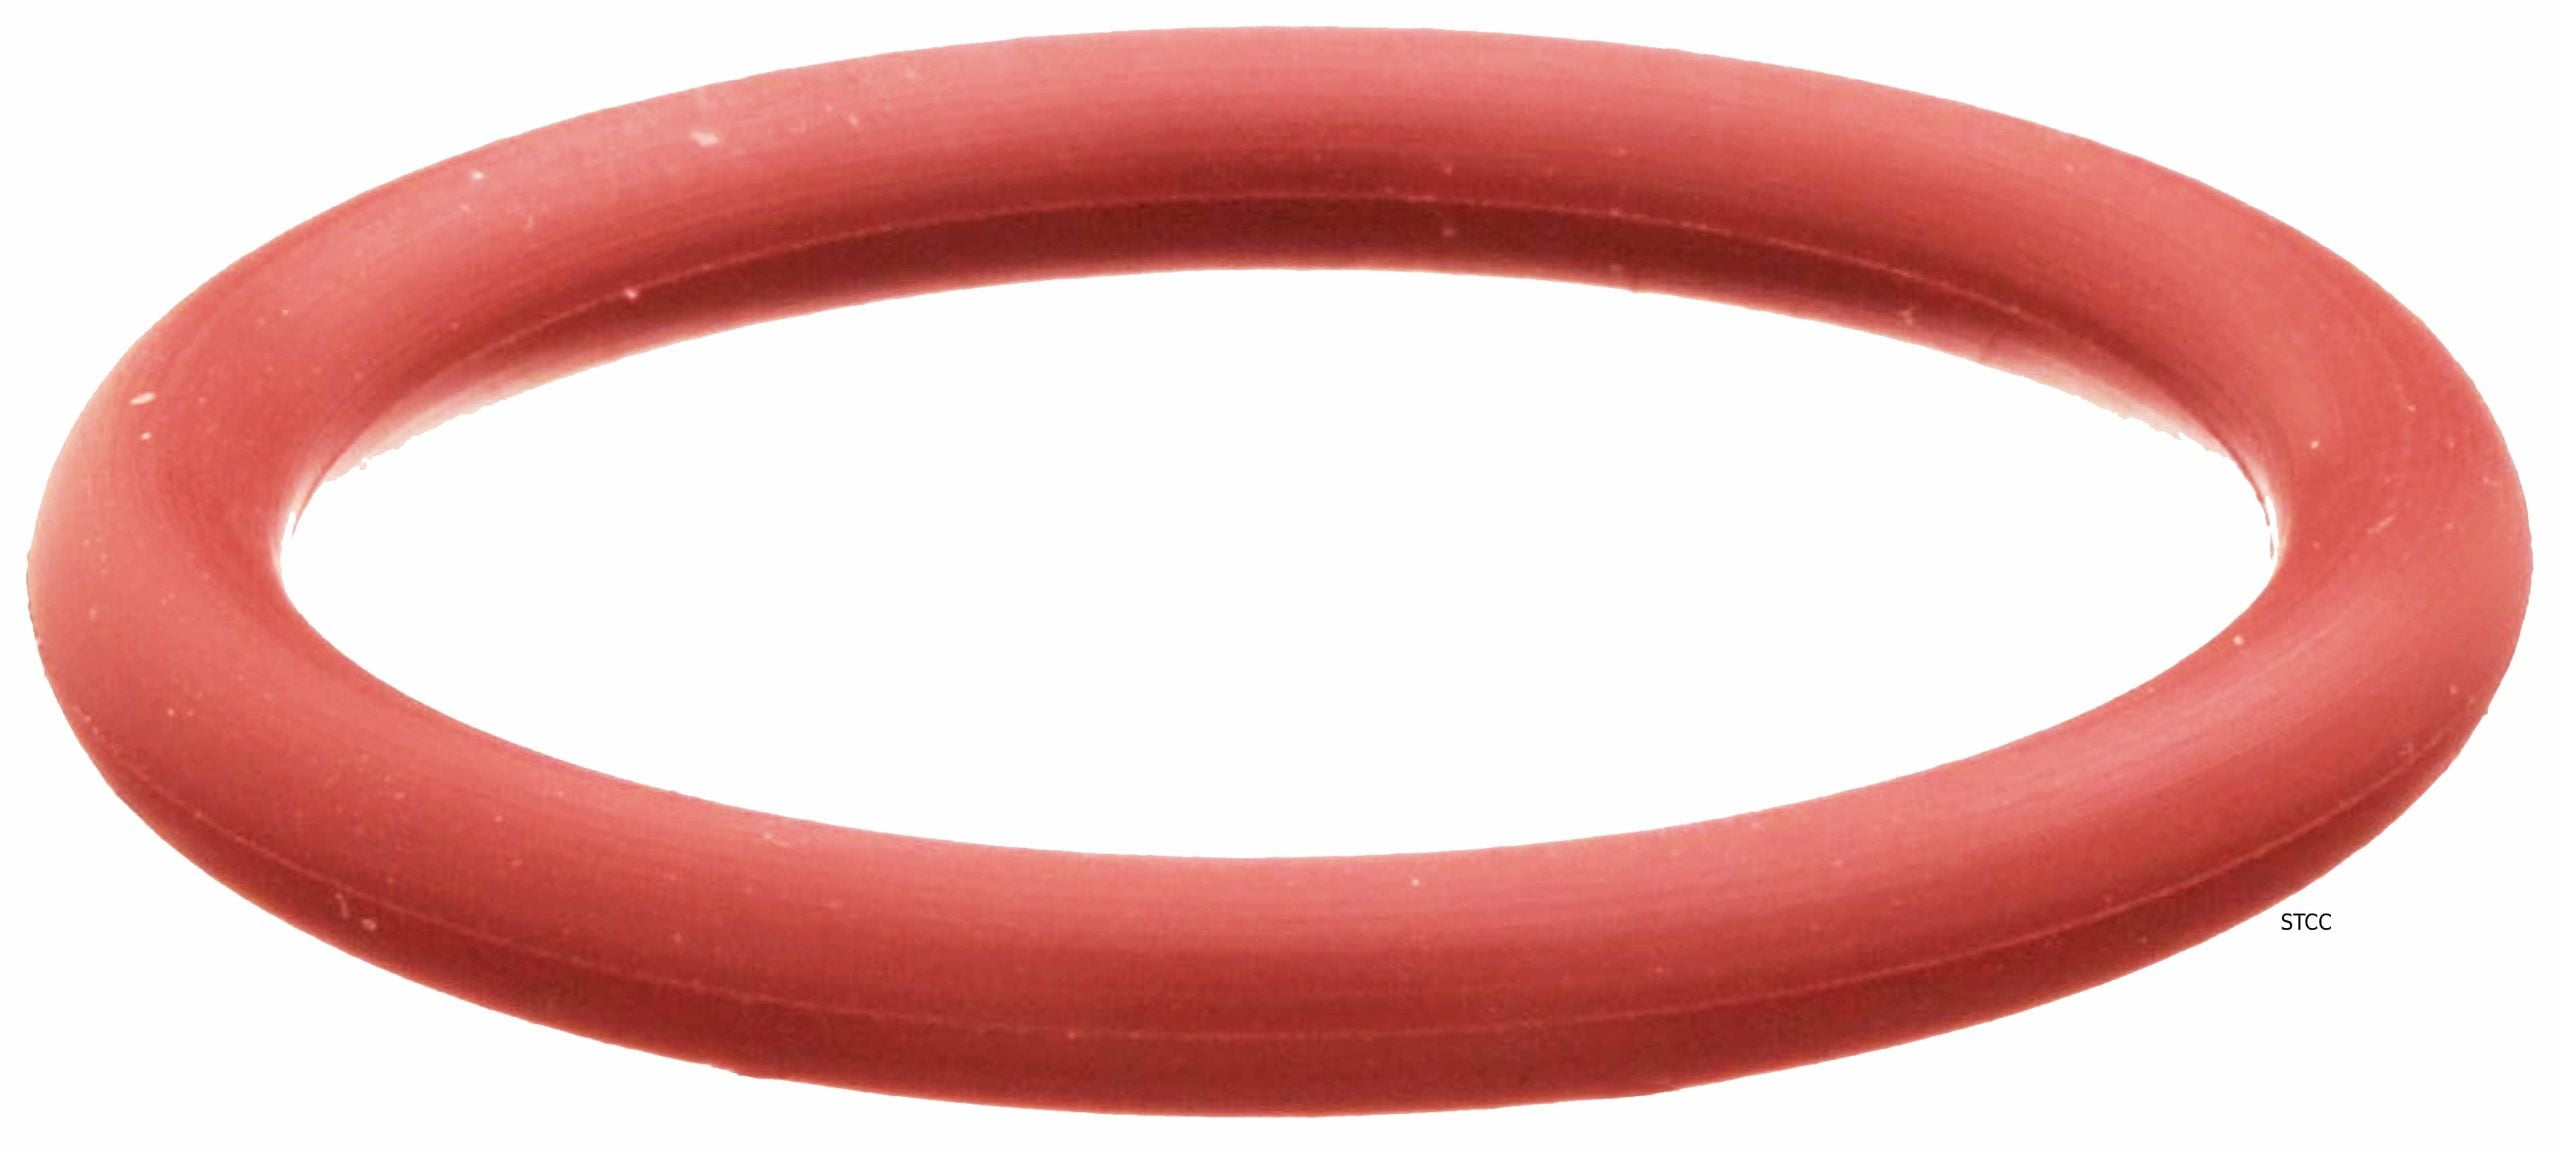 254 Silicone O-Ring 70a Durometer Red 5 1/2" ID 5 3/4" OD 1/8" width Pack of 10 